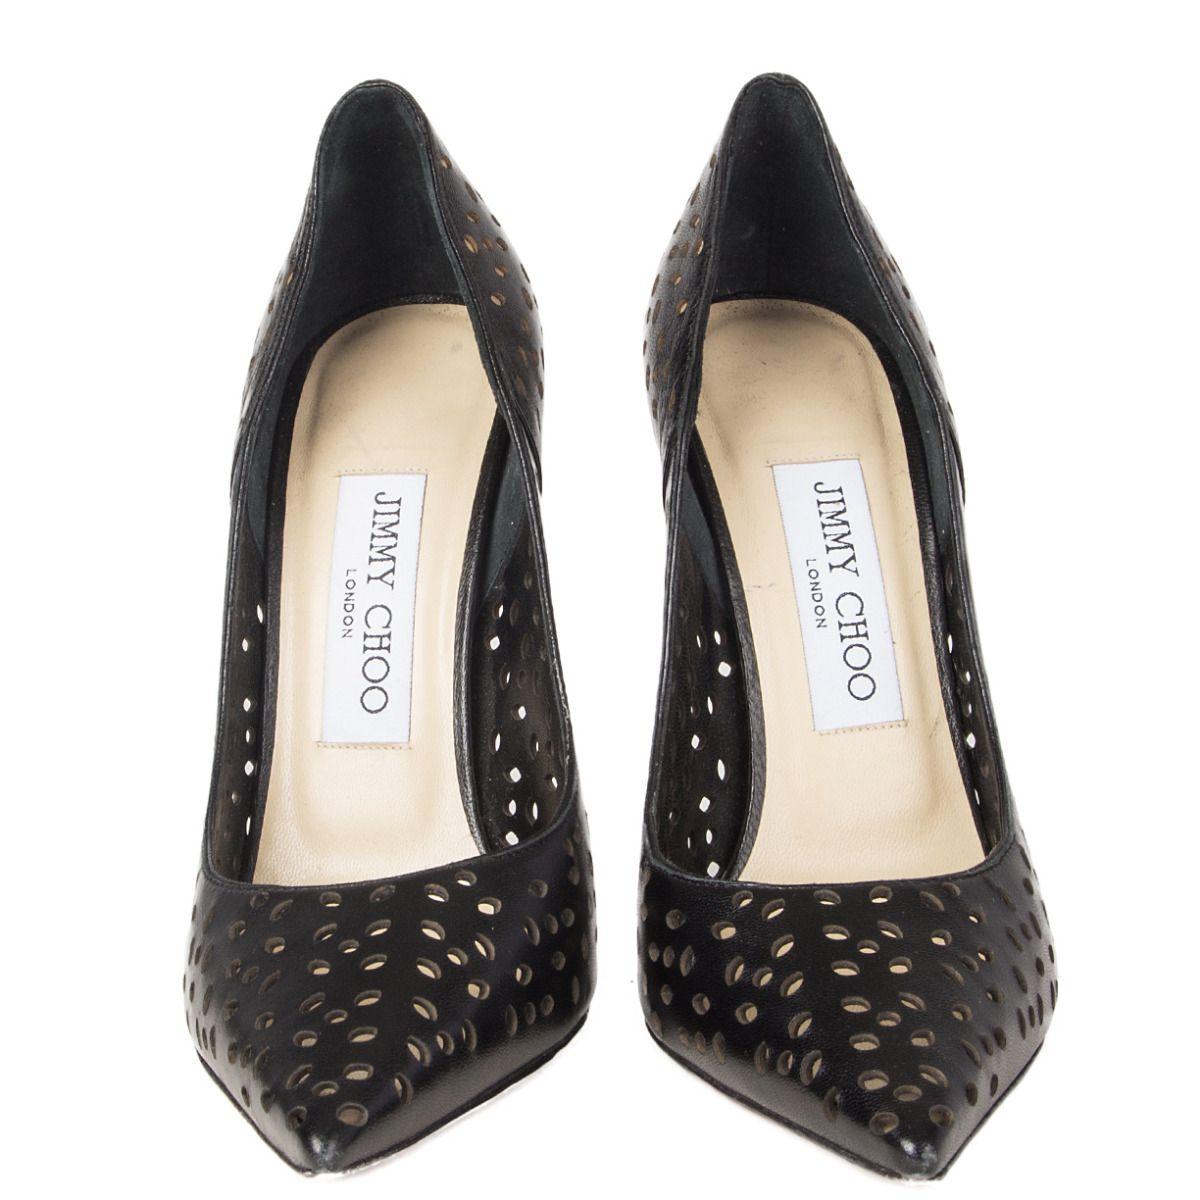 100% authentic Jimmy Choo 'Anouk' pointed-toe perforated pumps in black calfskin. Have been worn and are in excellent condition. 

Measurements
Imprinted Size	36
Shoe Size	36
Inside Sole	23.5cm (9.2in)
Width	7cm (2.7in)
Heel	12cm (4.7in)

All our